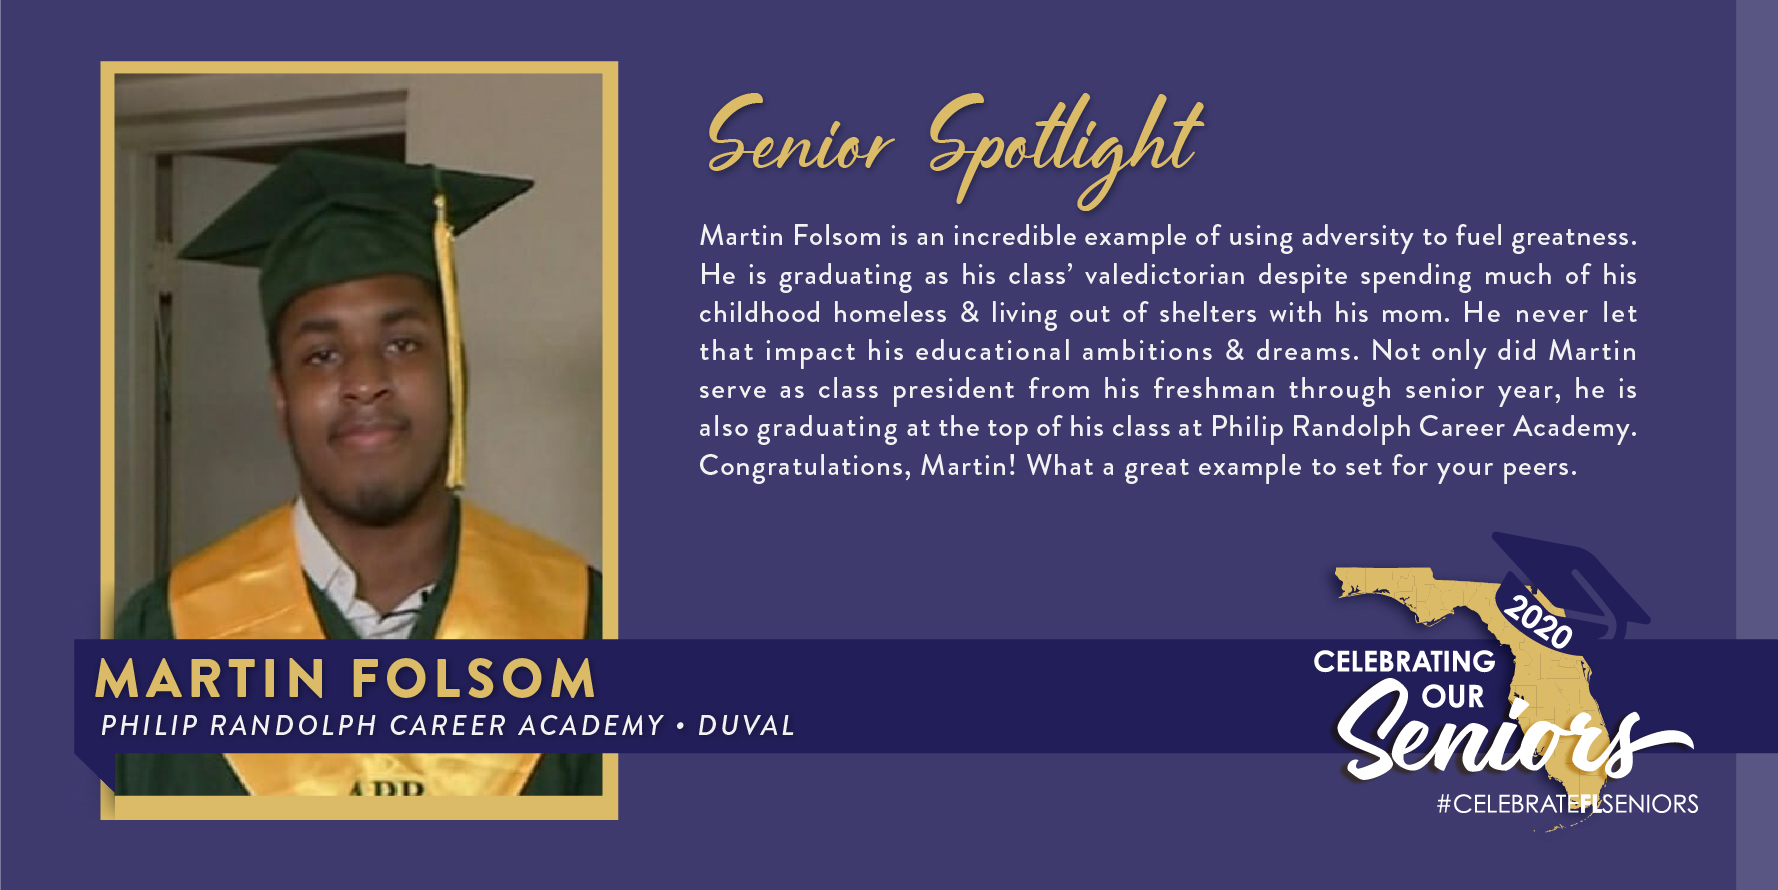 Duval County senior Martin Folsom is an incredible example of using adversity to fuel greatness. He is graduating as his class’ valedictorian despite being homeless multiple times.